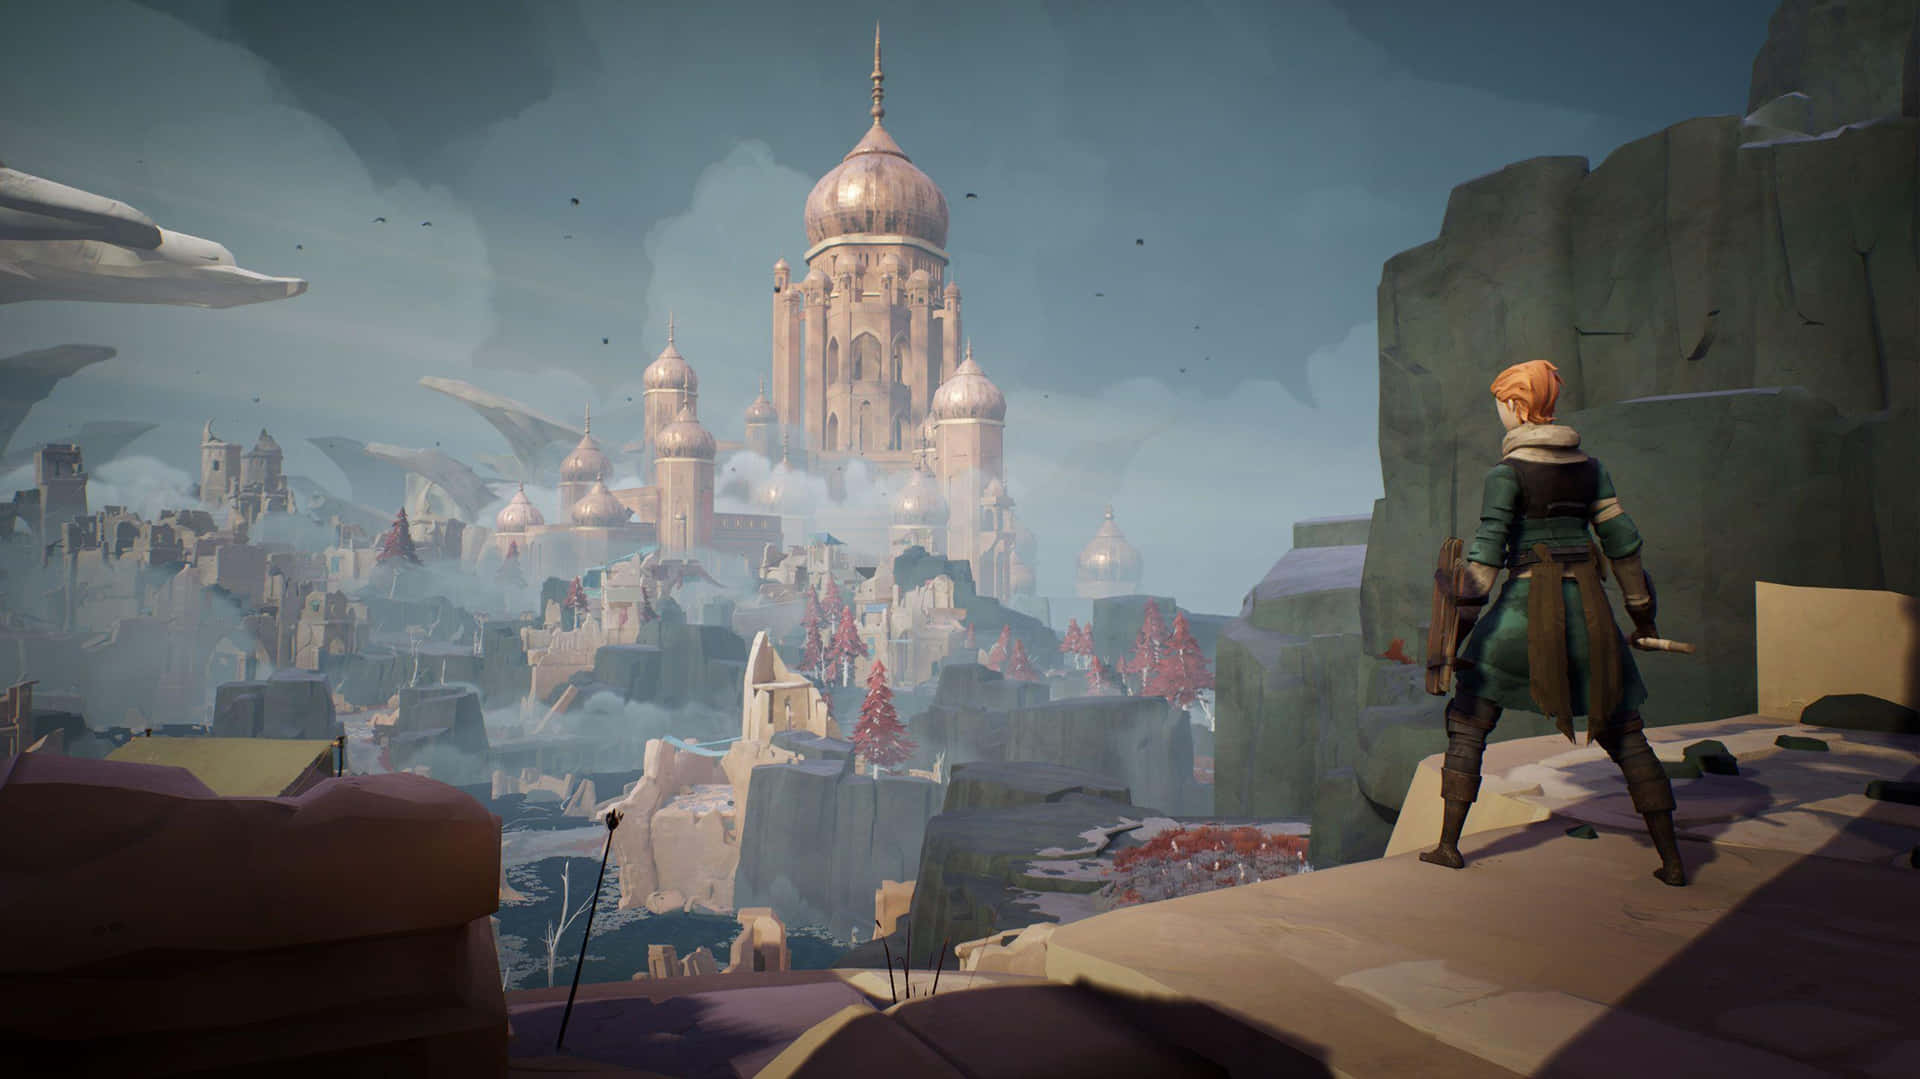 Explore the Unknown in the Action-Adventure RPG game "Ashen" Wallpaper